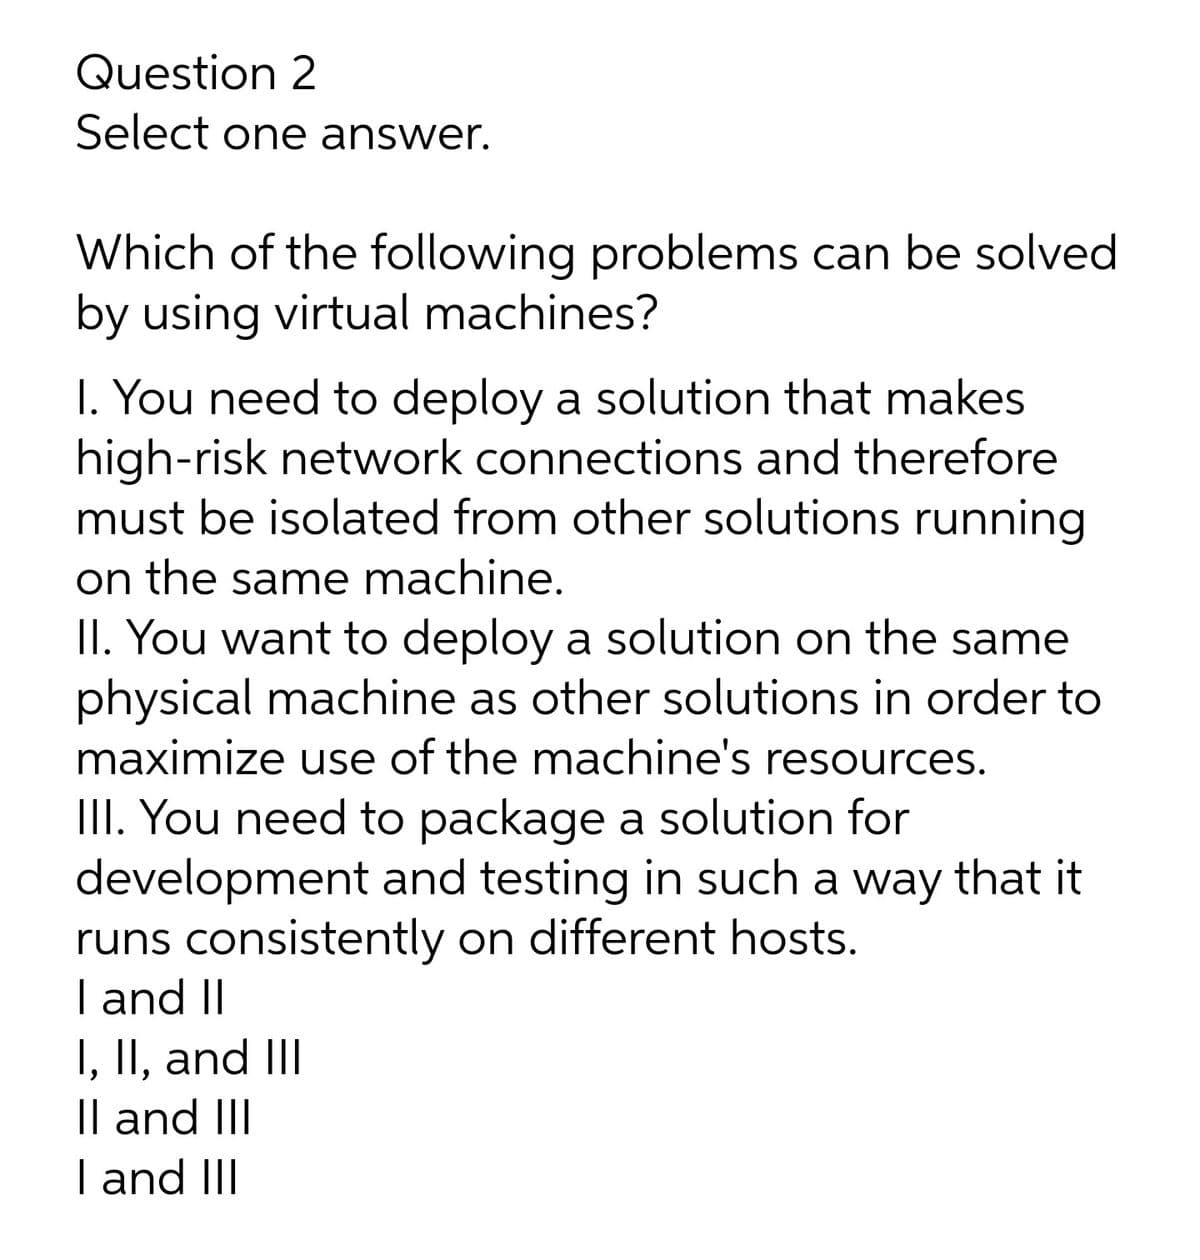 Question 2
Select one answer.
Which of the following problems can be solved
by using virtual machines?
I. You need to deploy a solution that makes
high-risk network connections and therefore
must be isolated from other solutions running
on the same machine.
II. You want to deploy a solution on the same
physical machine as other solutions in order to
maximize use of the machine's resources.
III. You need to package a solution for
development and testing in such a way that it
runs consistently on different hosts.
I and II
I, II, and III
|l and III
I and III
